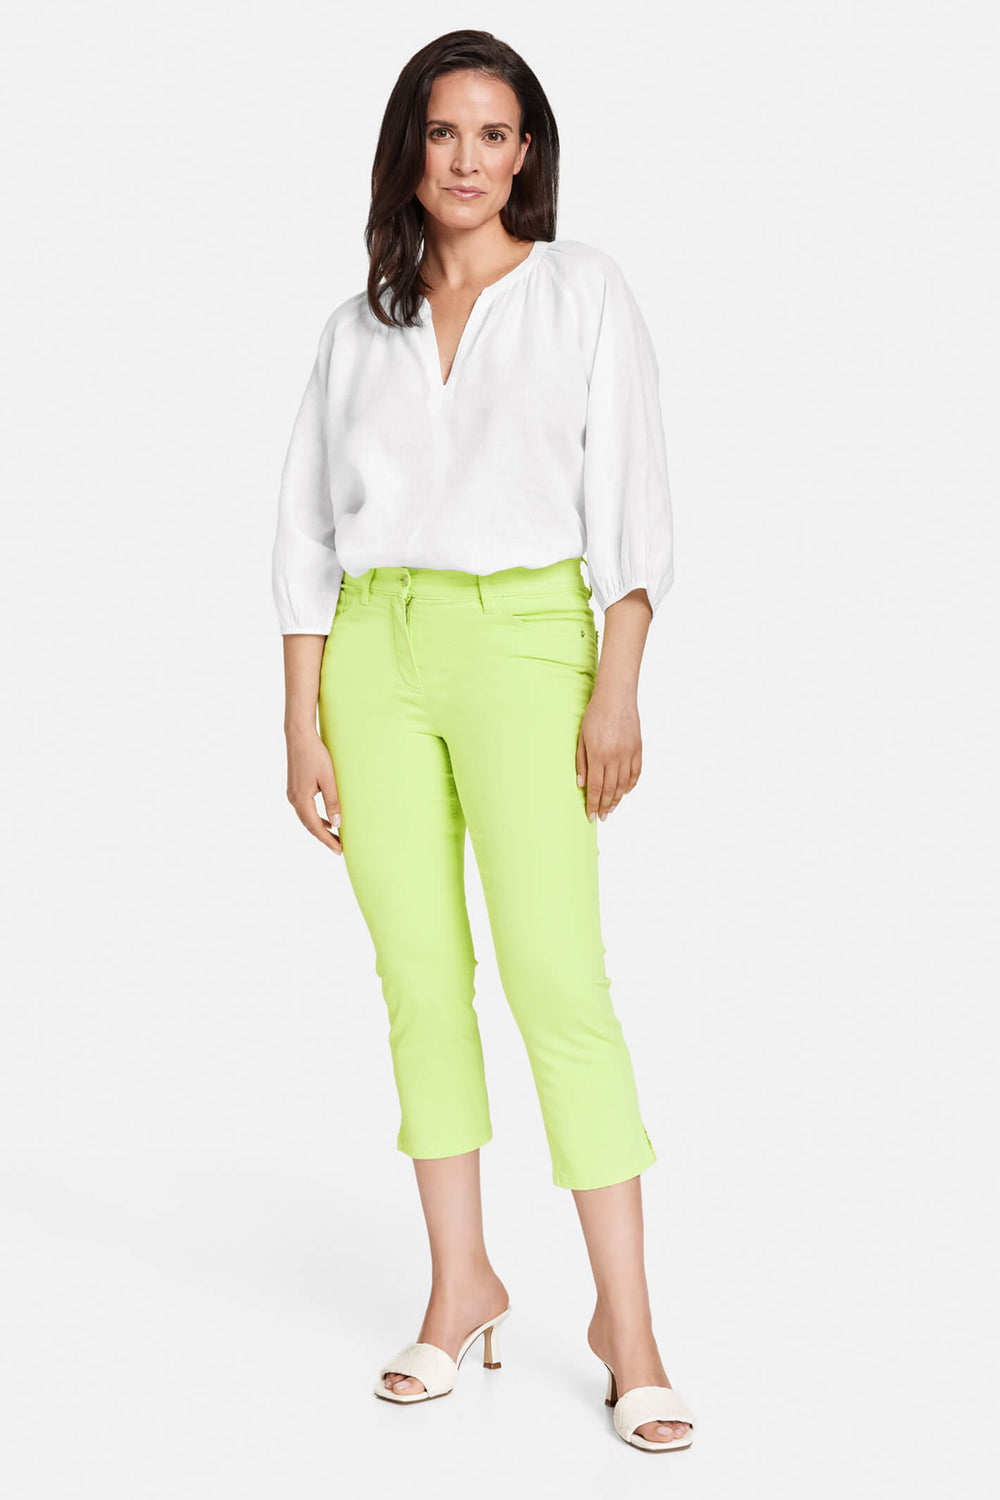 Gerry Weber 822097 Light Lime Green Best4me Cropped Trousers - Experience Boutique